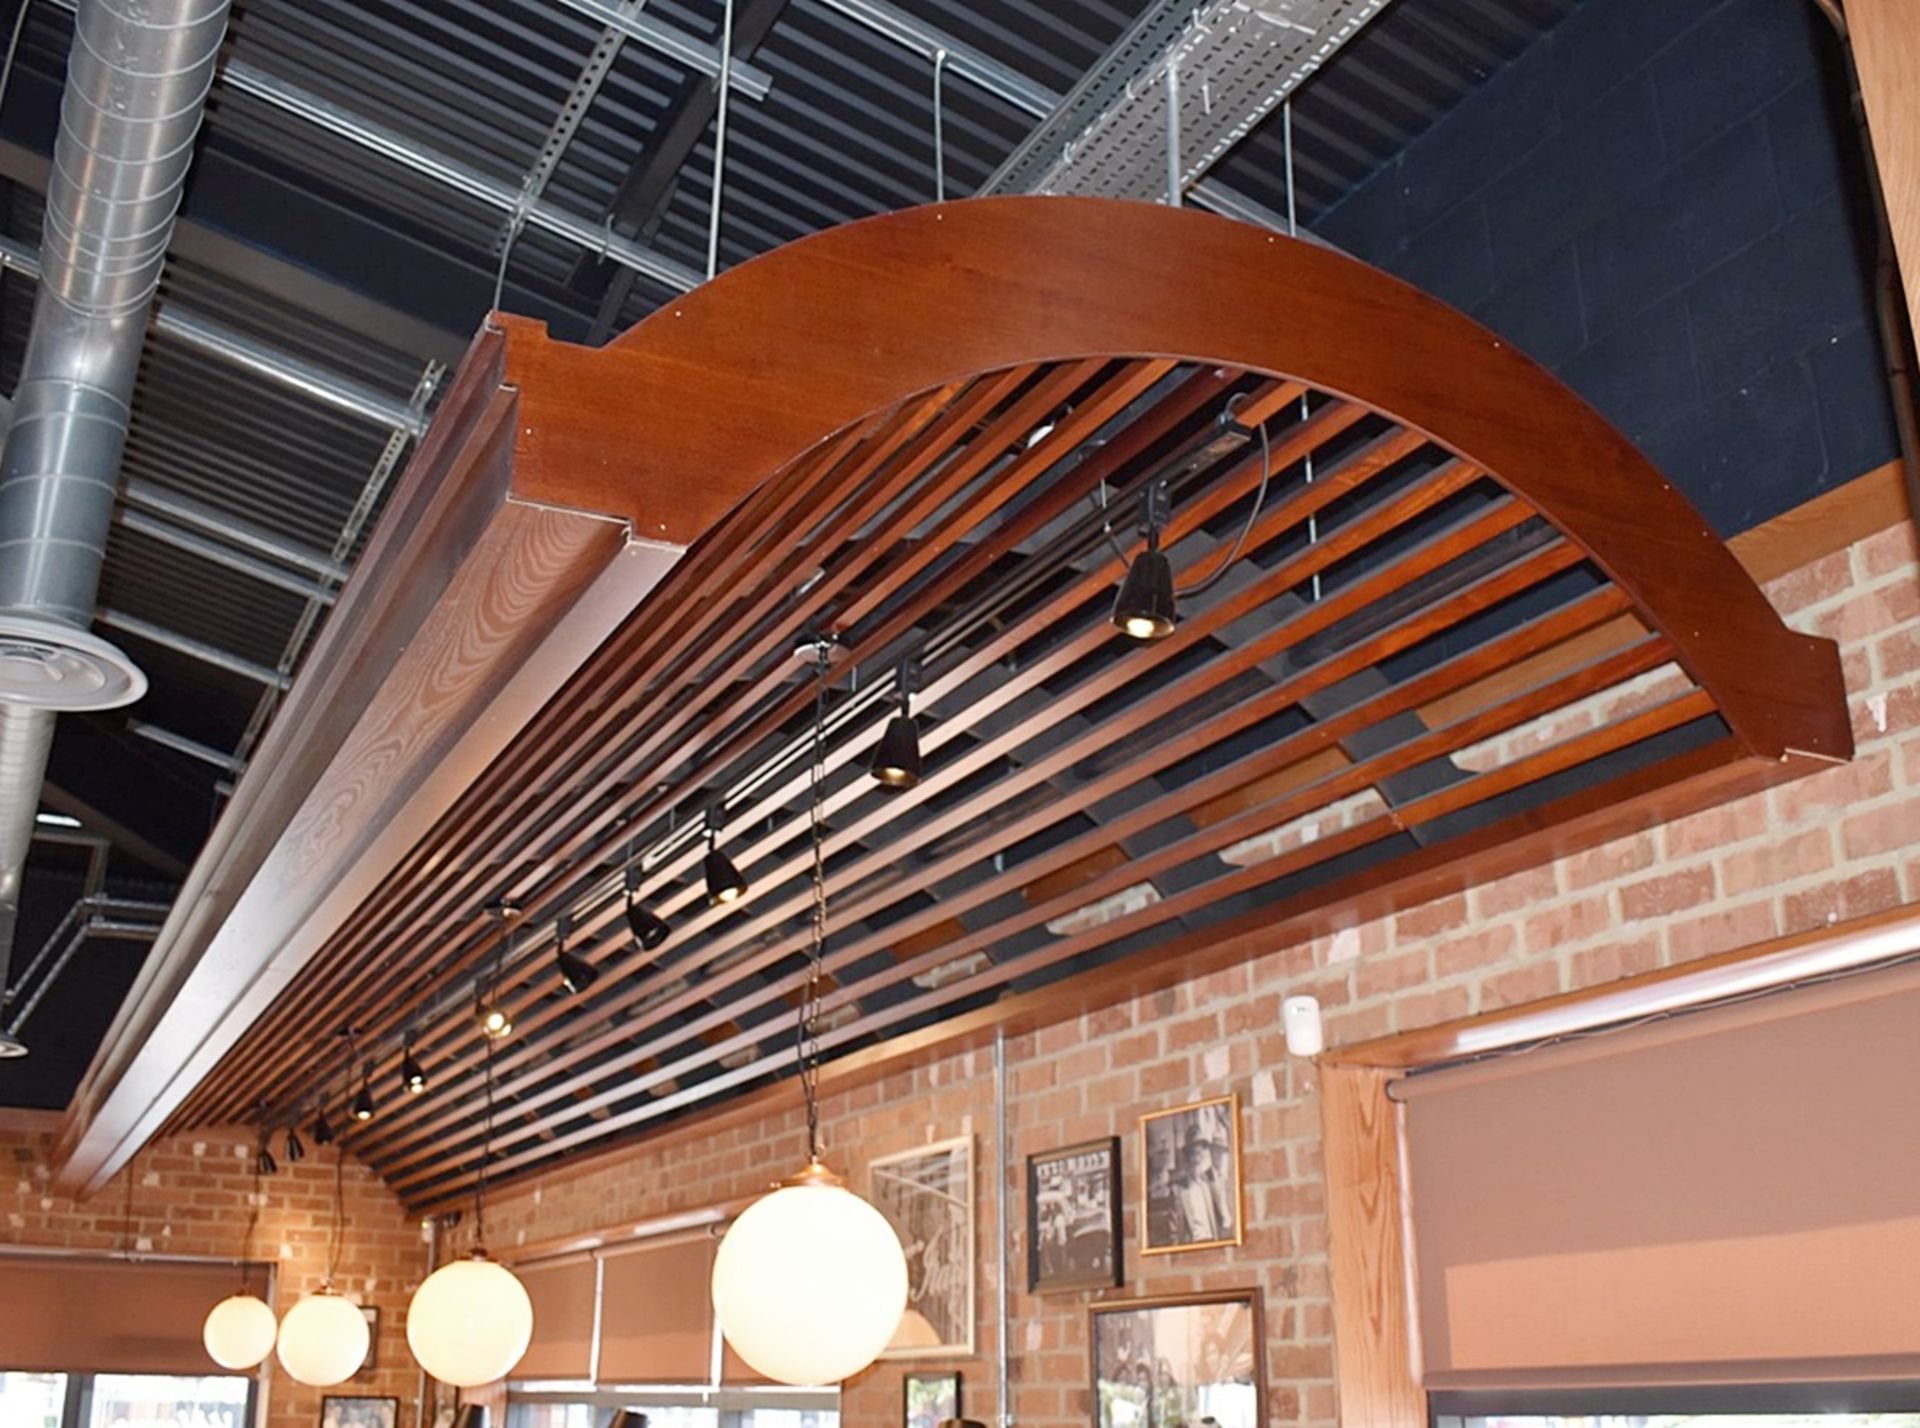 1 x Large Suspended U Shaped Bespoke Slat Ceiling Feature - Approx 30ft in Length - Can Be